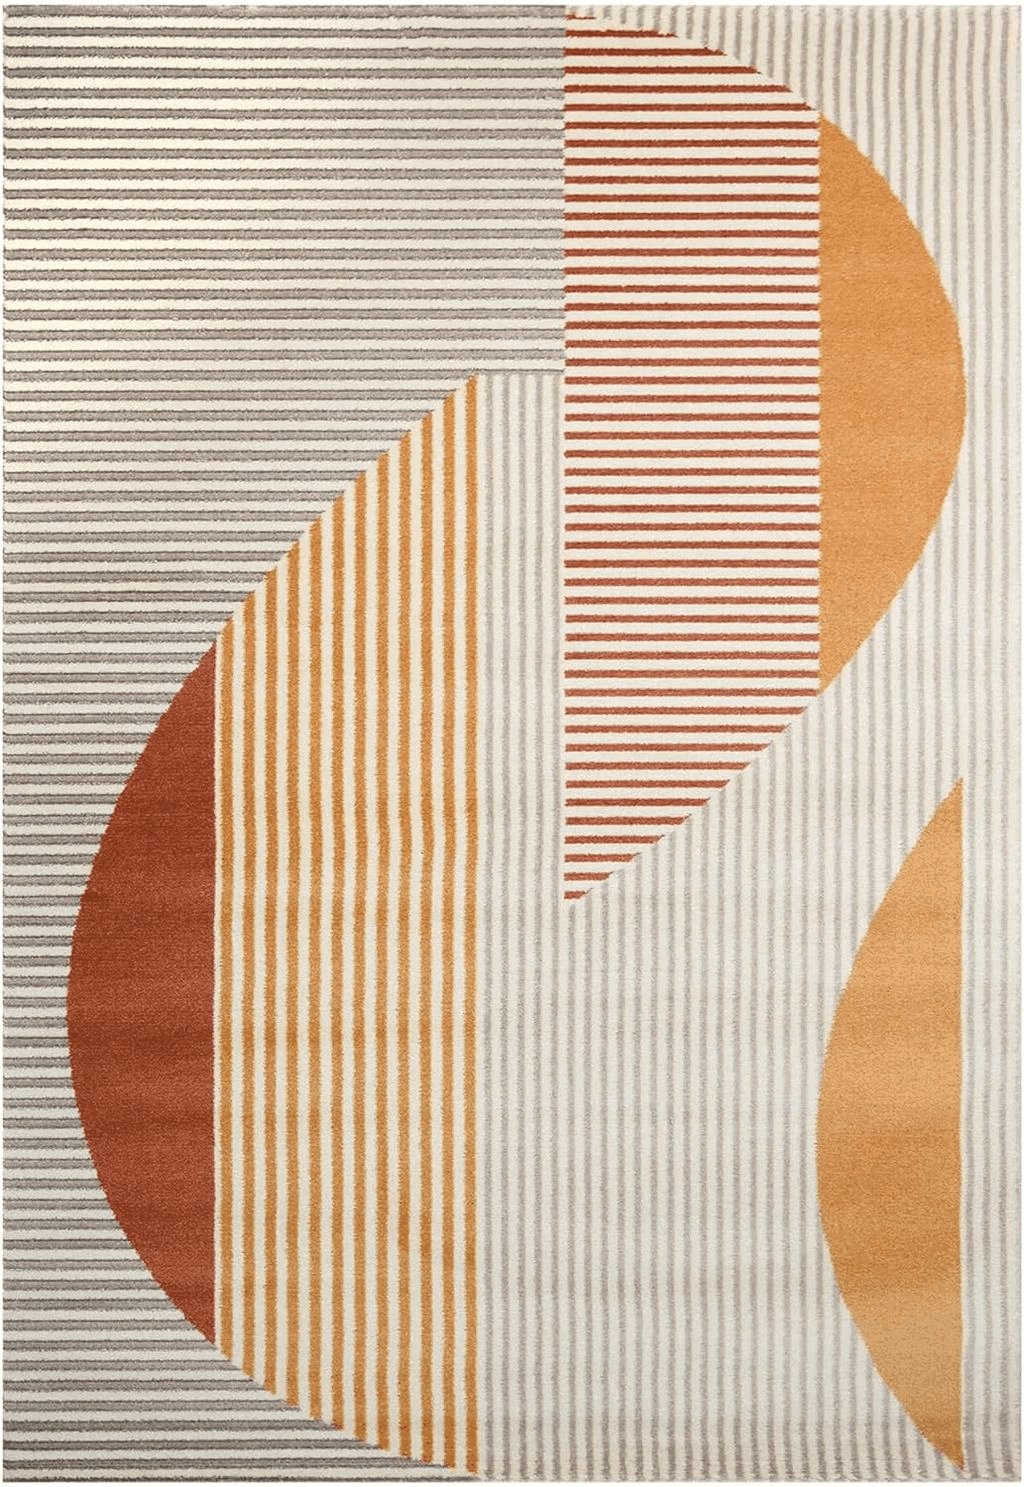 Rugs for Living Room- Large Area Rug, Yellow Striped Rug, Indoor Area Rug with Jute Backing, Anti-Skid Carpet(Yellow, 6' 5" x 9' 5")